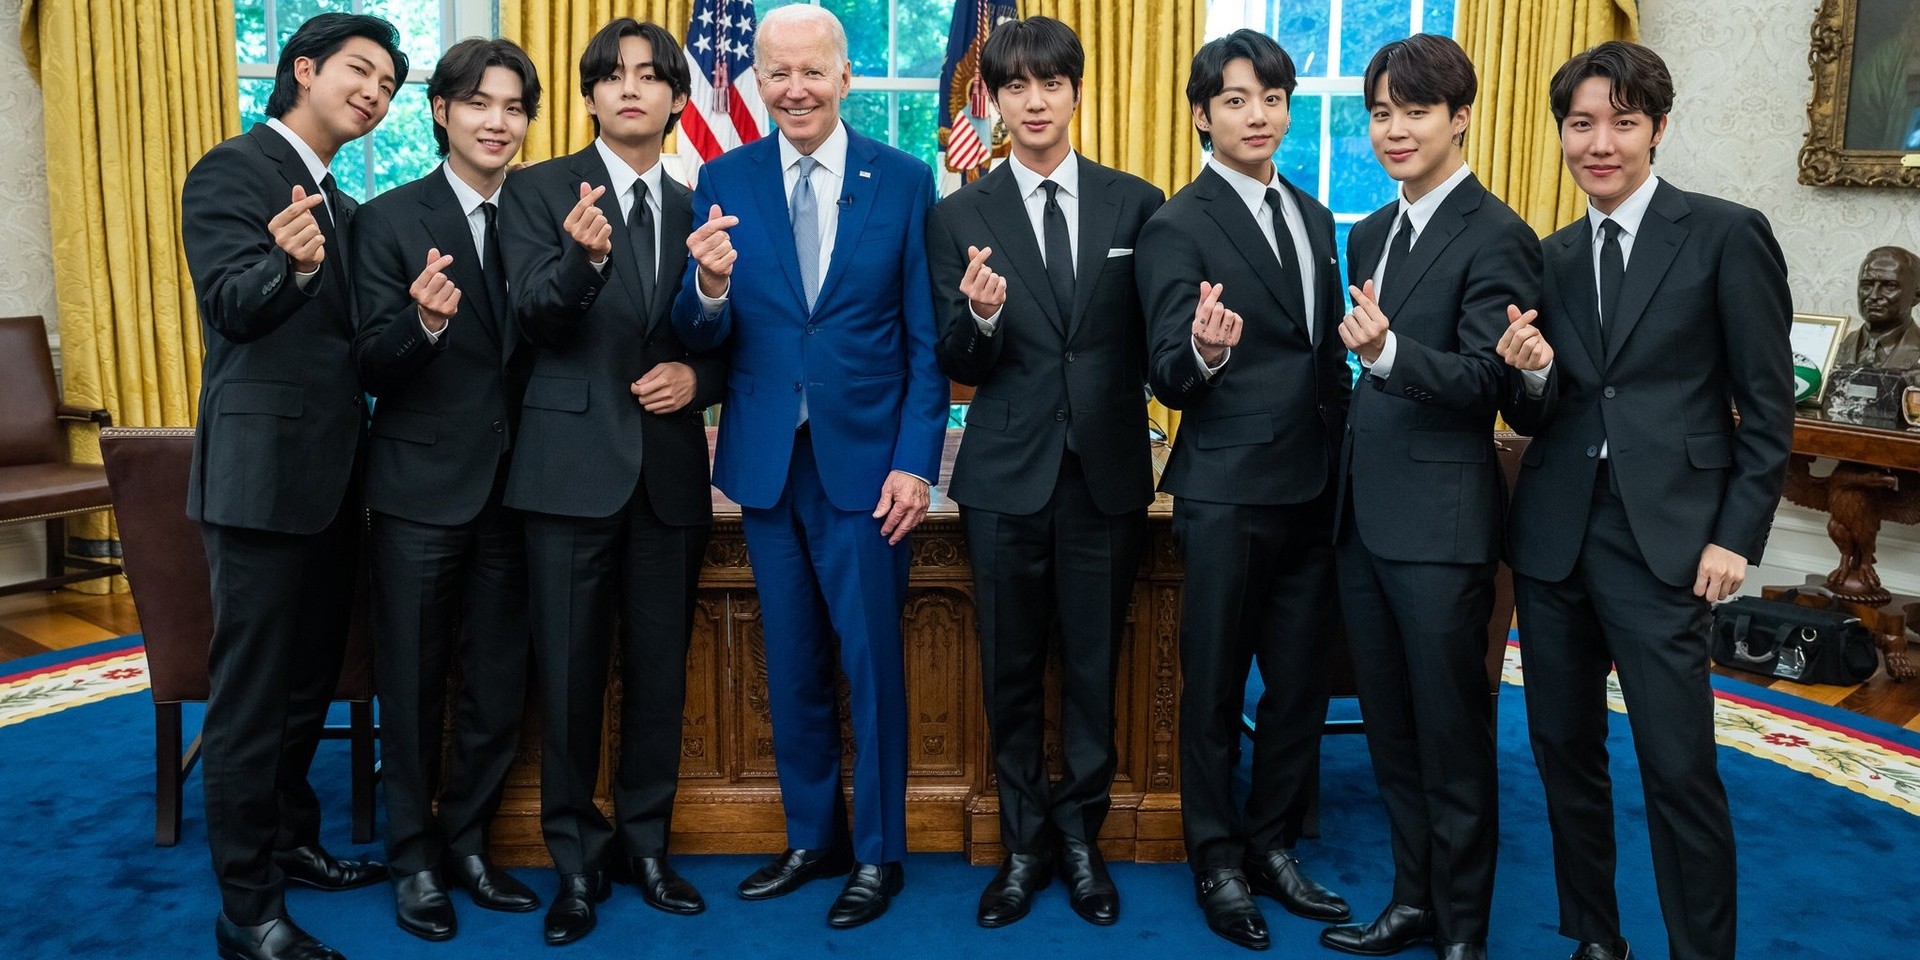 BTS meet US President Biden at the White House: "Equality begins when we open up and embrace our differences."